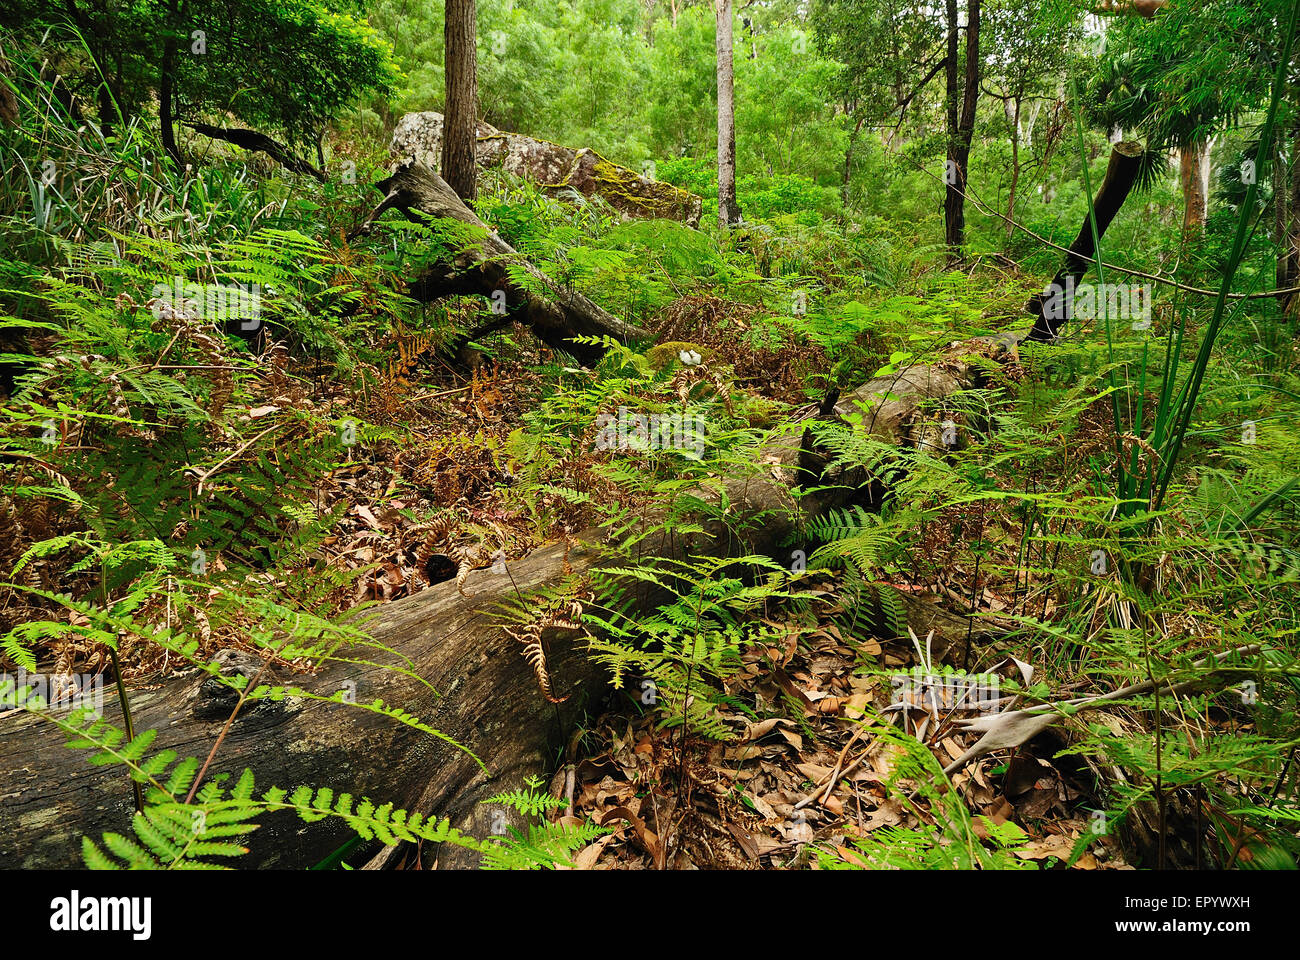 Australian bush forest with green trees and plants Stock Photo